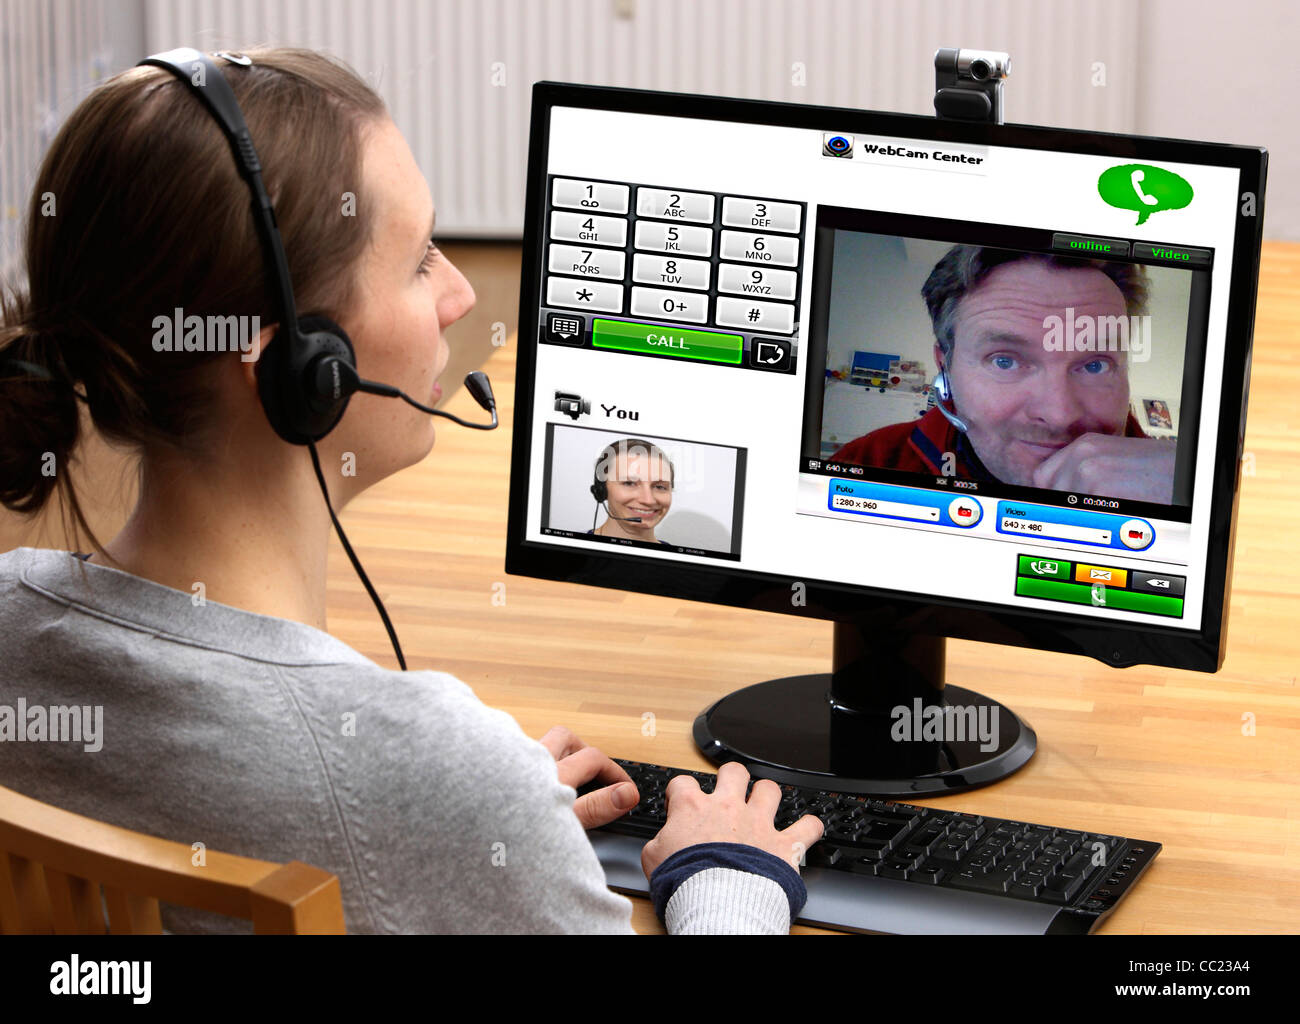 Two people talking over the Internet. Video chat with, with web cam and headset through voice over IP, VOIP. Live online chat. Stock Photo